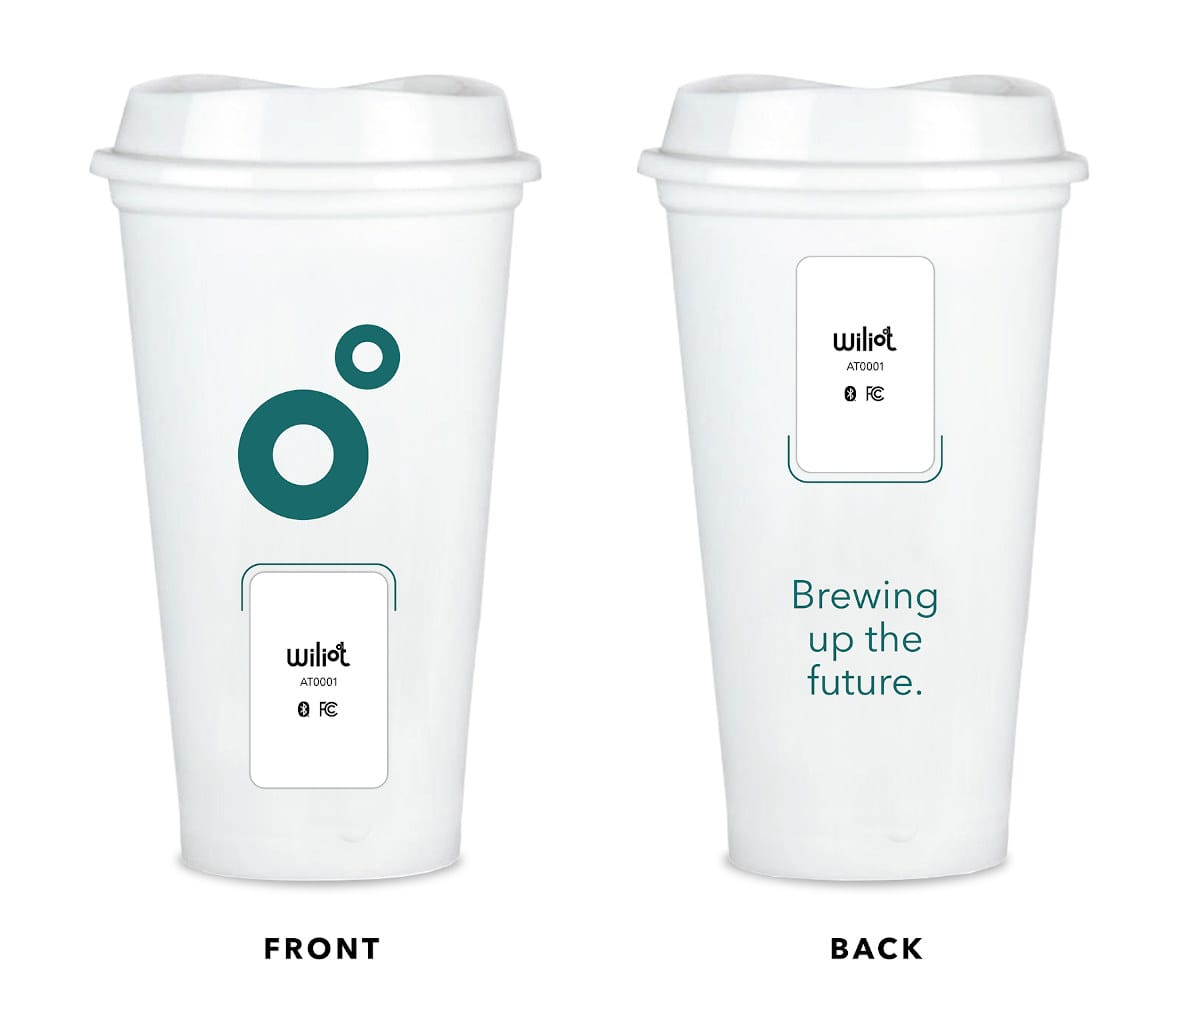 smart coffee cup with sensors, energy harvesting